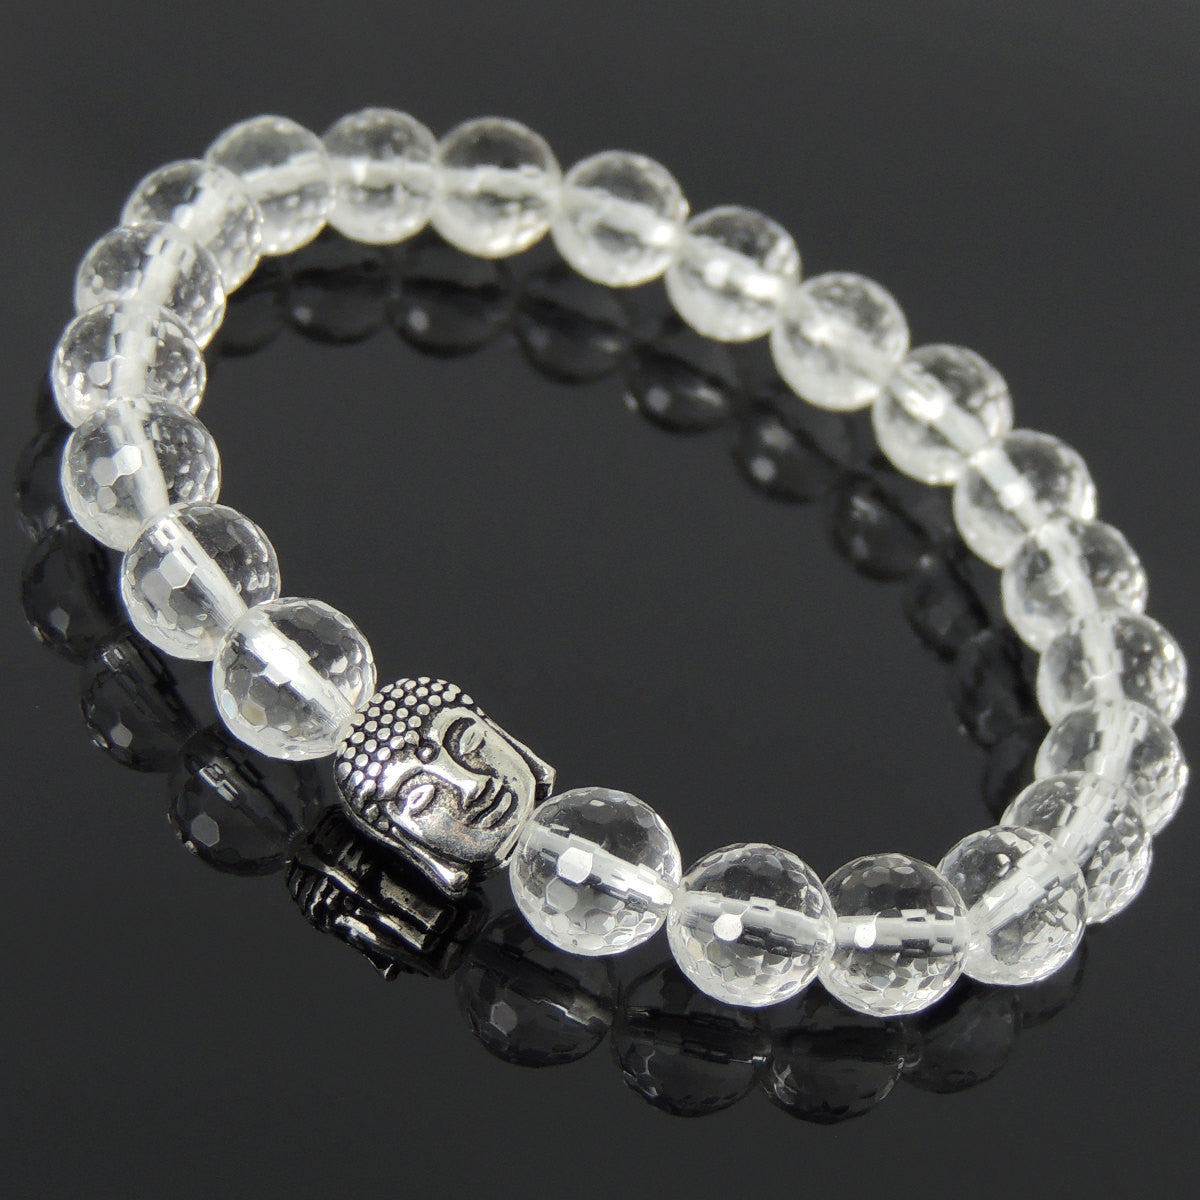 8mm Faceted White Crystal Quartz Healing Gemstone Bracelet with S925 Sterling Silver Guanyin Buddha Bead- Handmade by Gem & Silver BR886